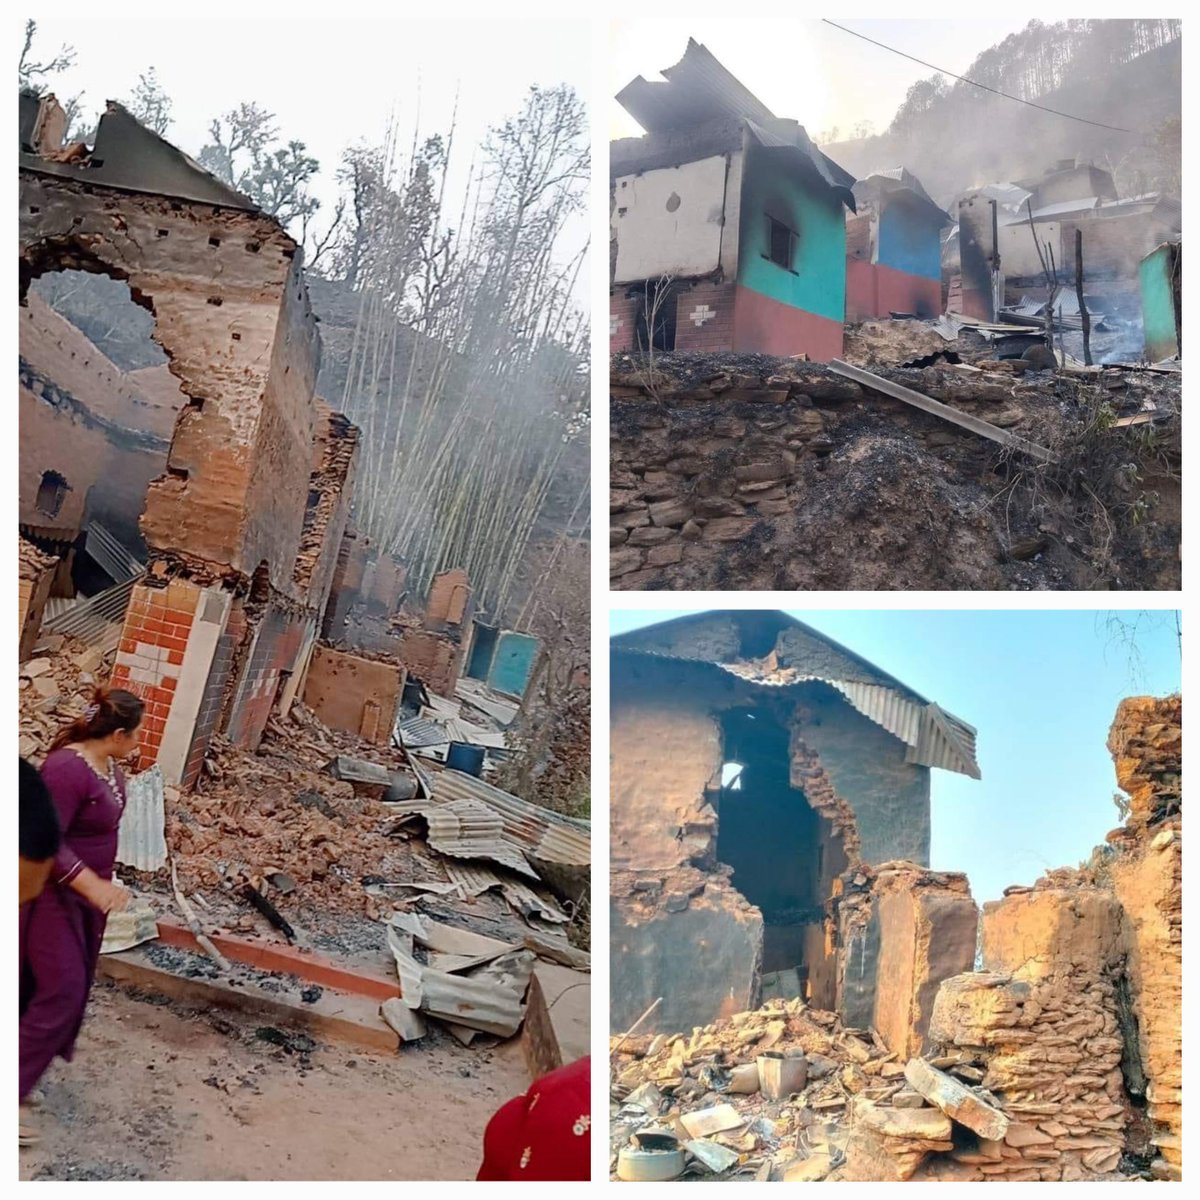 Deadly forest fire resulting huge loss of lives and damages of properties in recent days in Nepal. Pictures showing the impact of forest fire in settlement, assets, grain and their livestock. #lessRainfall #dryVegetation #humanCause @NDRRMA_Nepal @LossandDamage